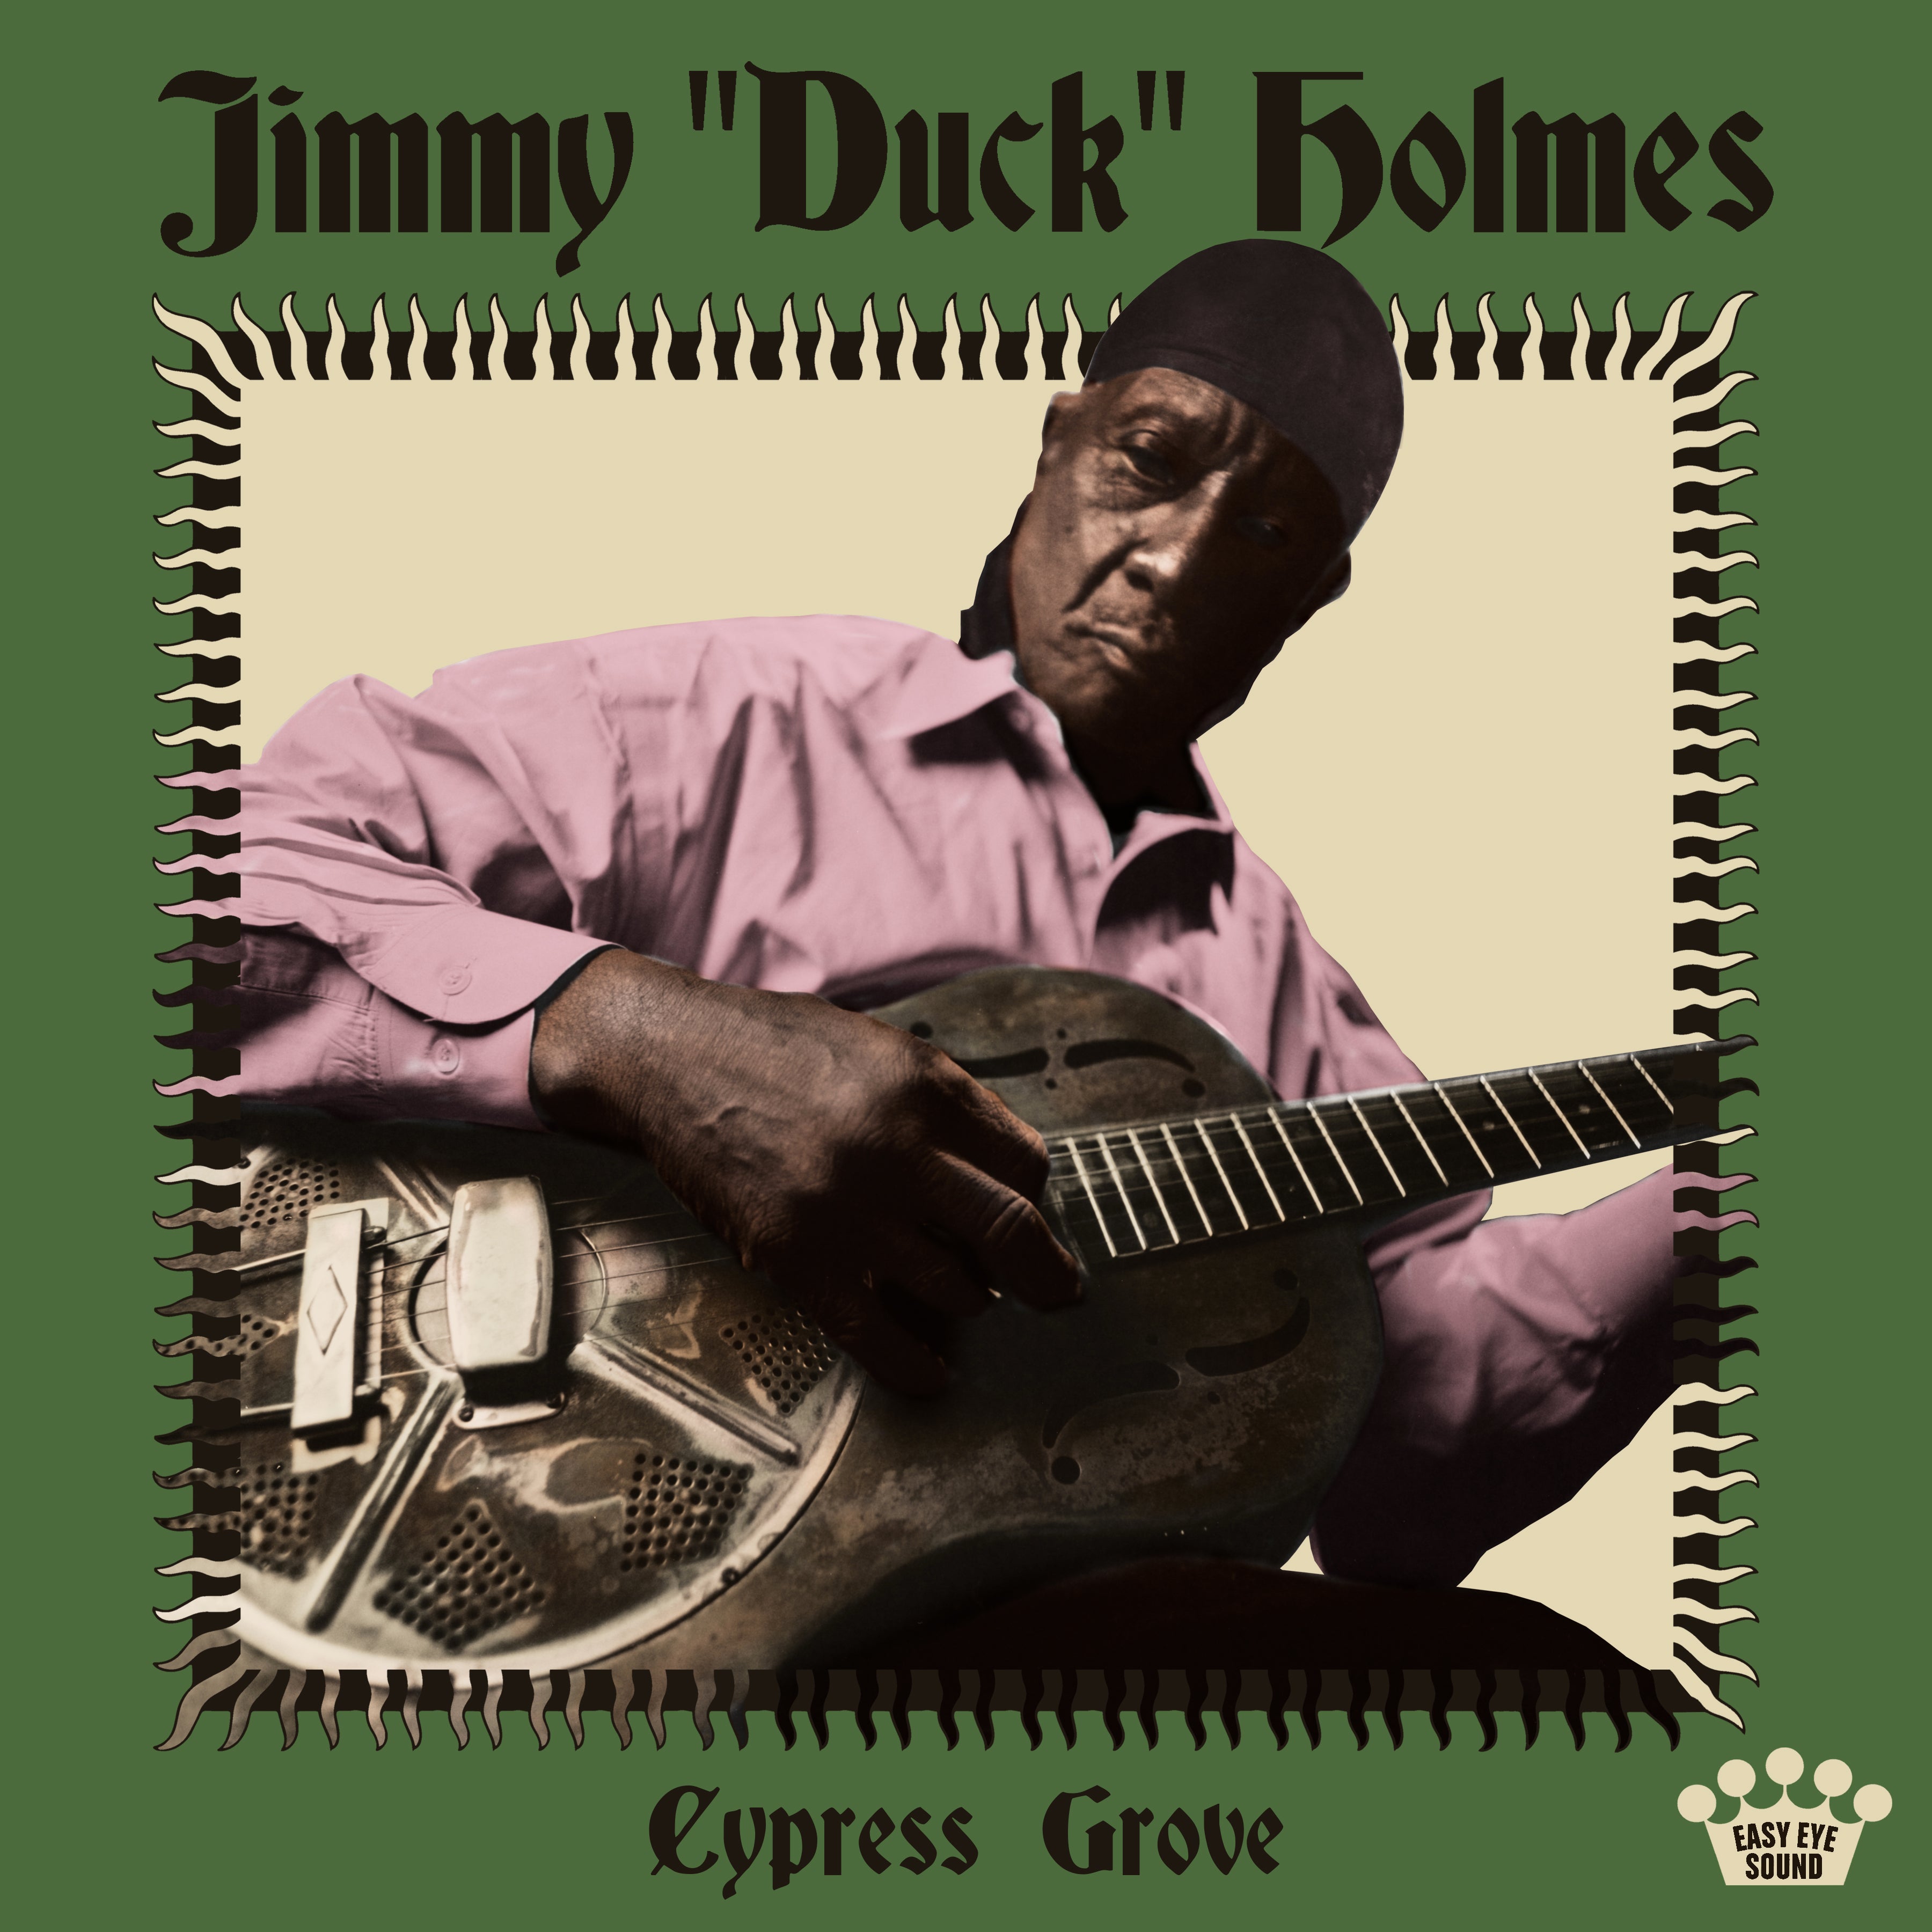 EASY EYE SOUND TO RELEASE JIMMY “DUCK” HOLMES’ NEW ALBUM “CYPRESS GROVE” ON OCTOBER 18TH